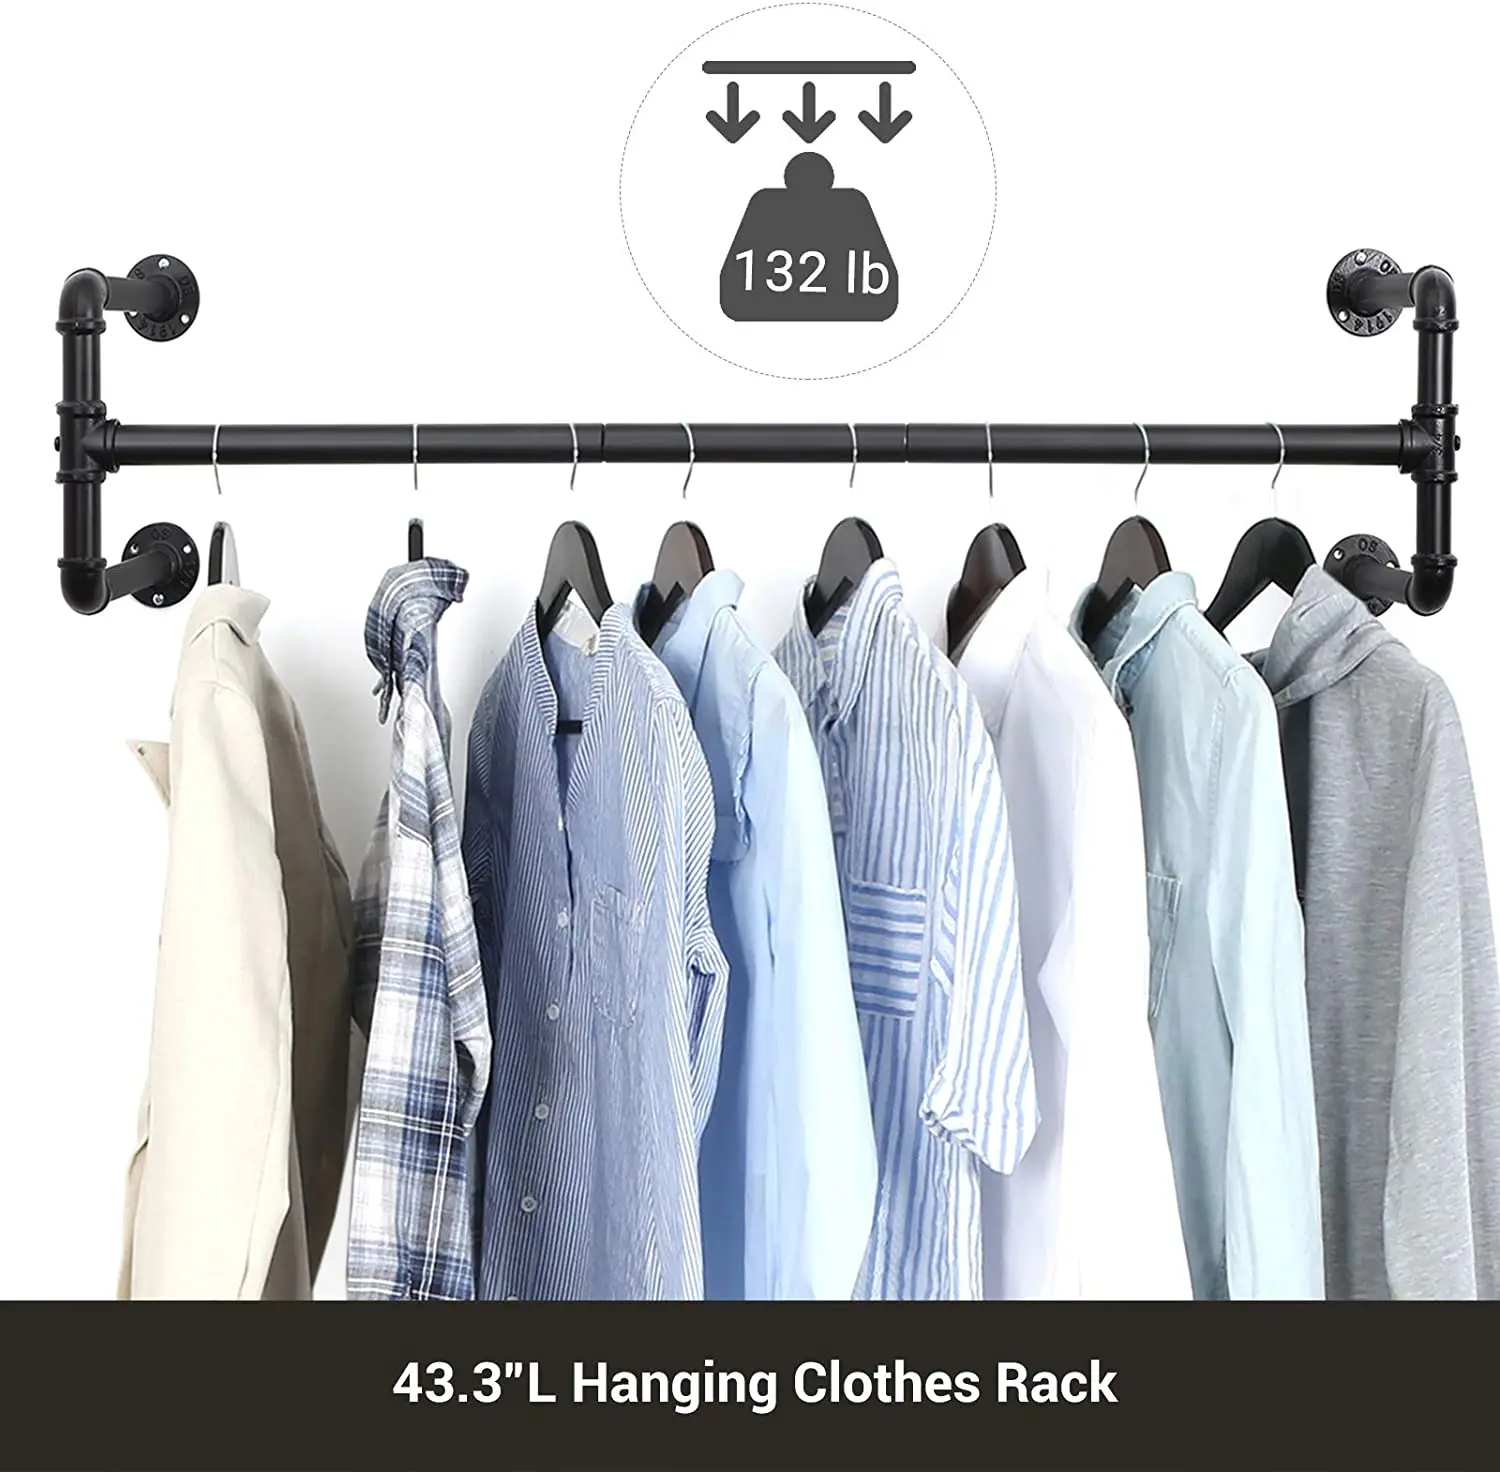 Wall Mounted Industrial Pipe Clothes Rack, Heavy Duty Black cast Iron Garment Rack Bar, Hanging Rod for Closet Storage